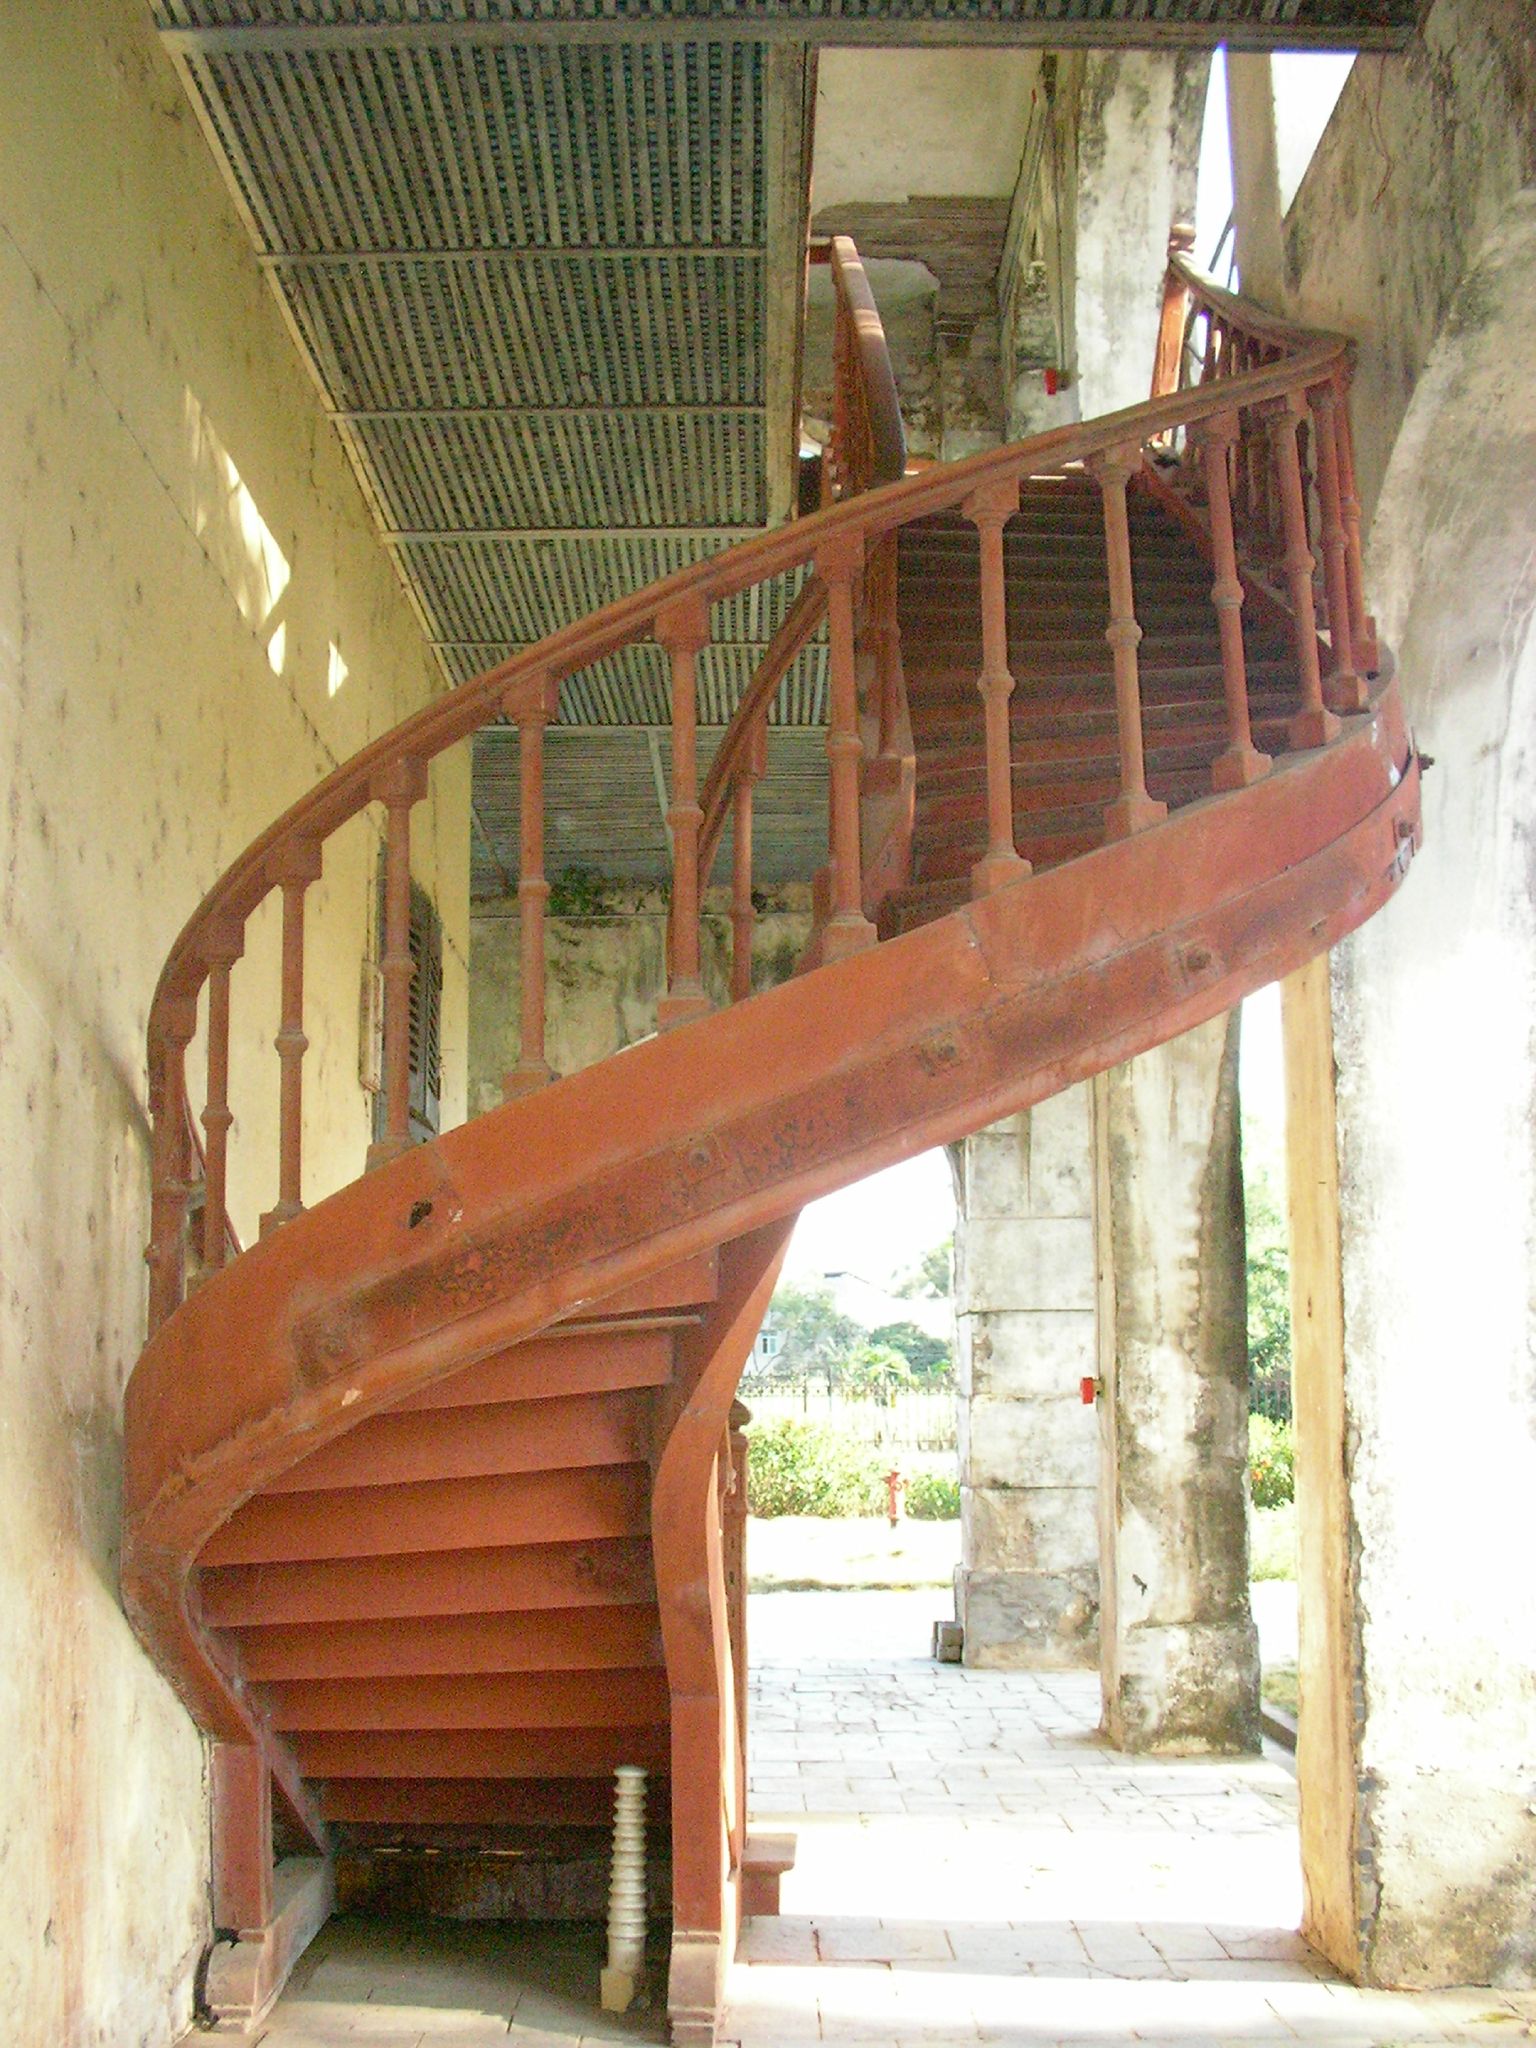 French staircase at the ruins of the french consulate in longzhou, guangxi, china.jpg